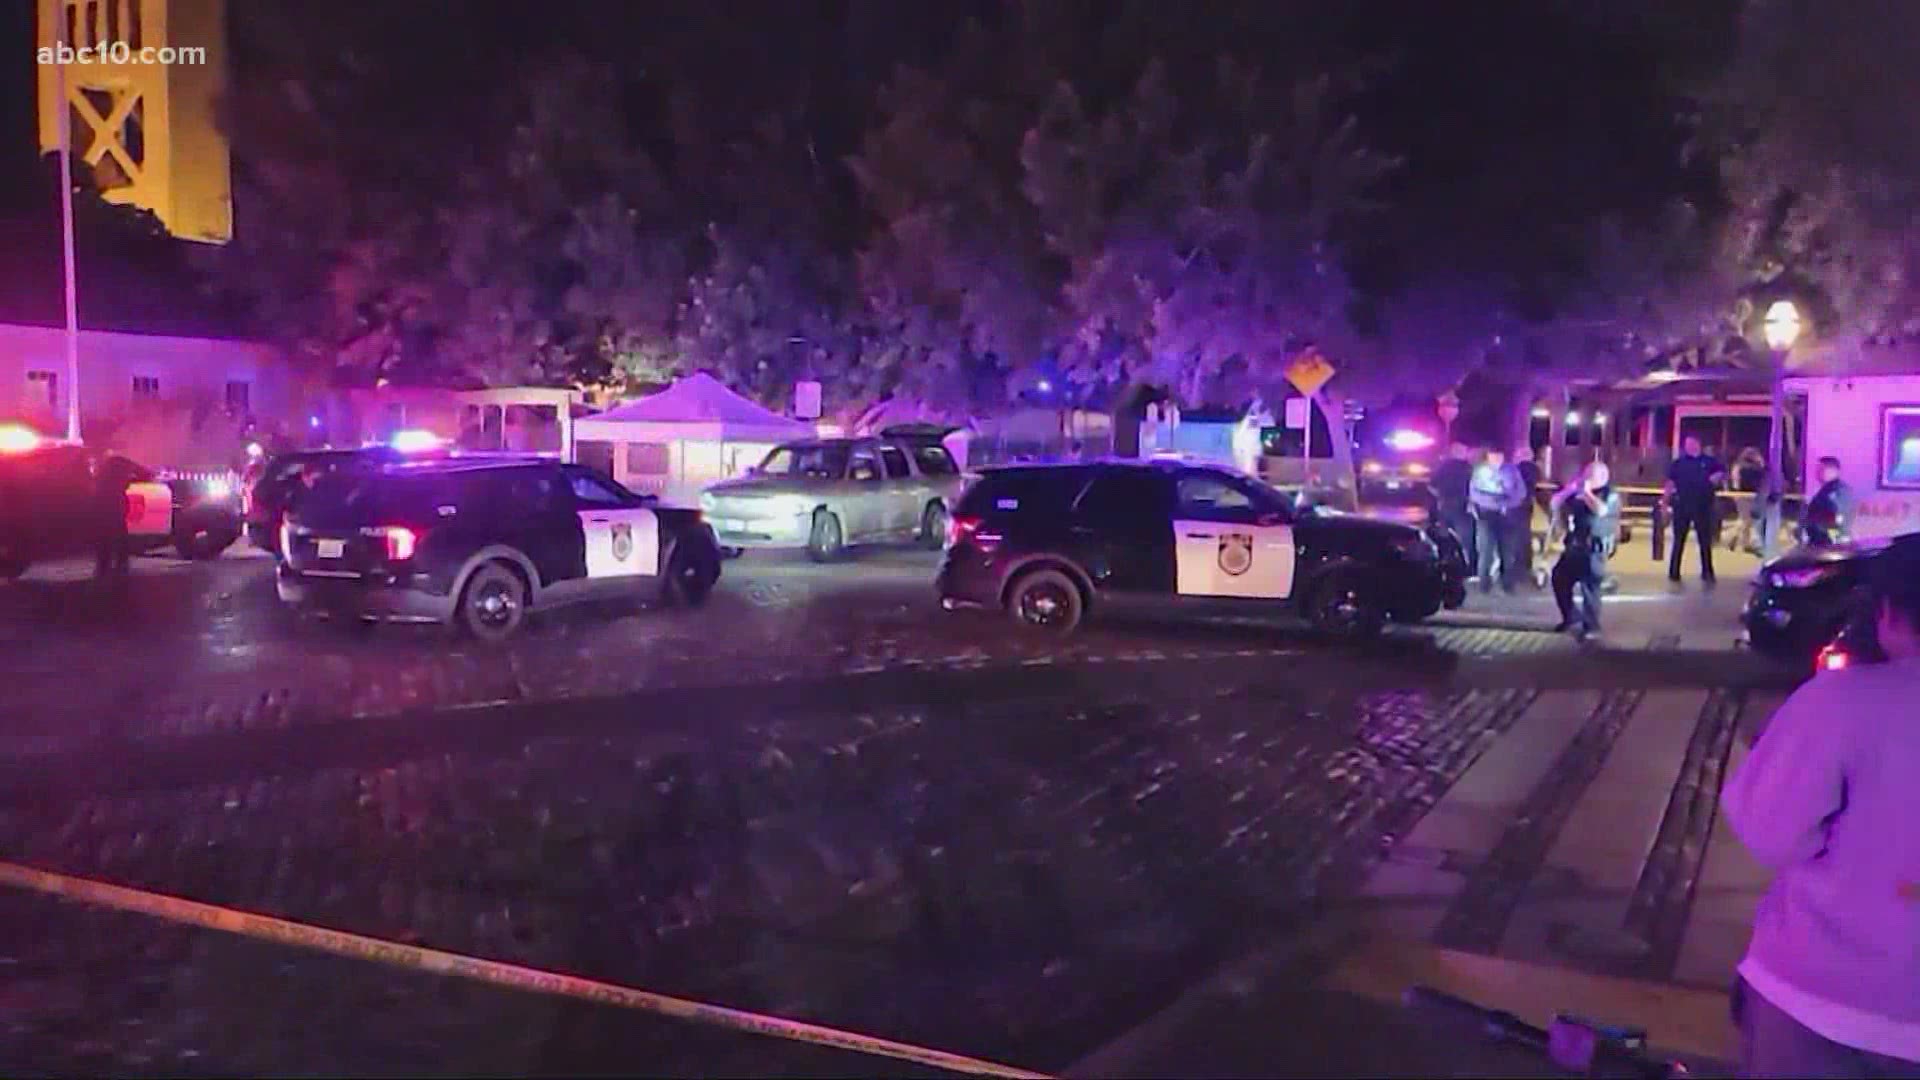 Four people were injured, and two people died in a shooting late Friday night near the Old Sacramento waterfront.